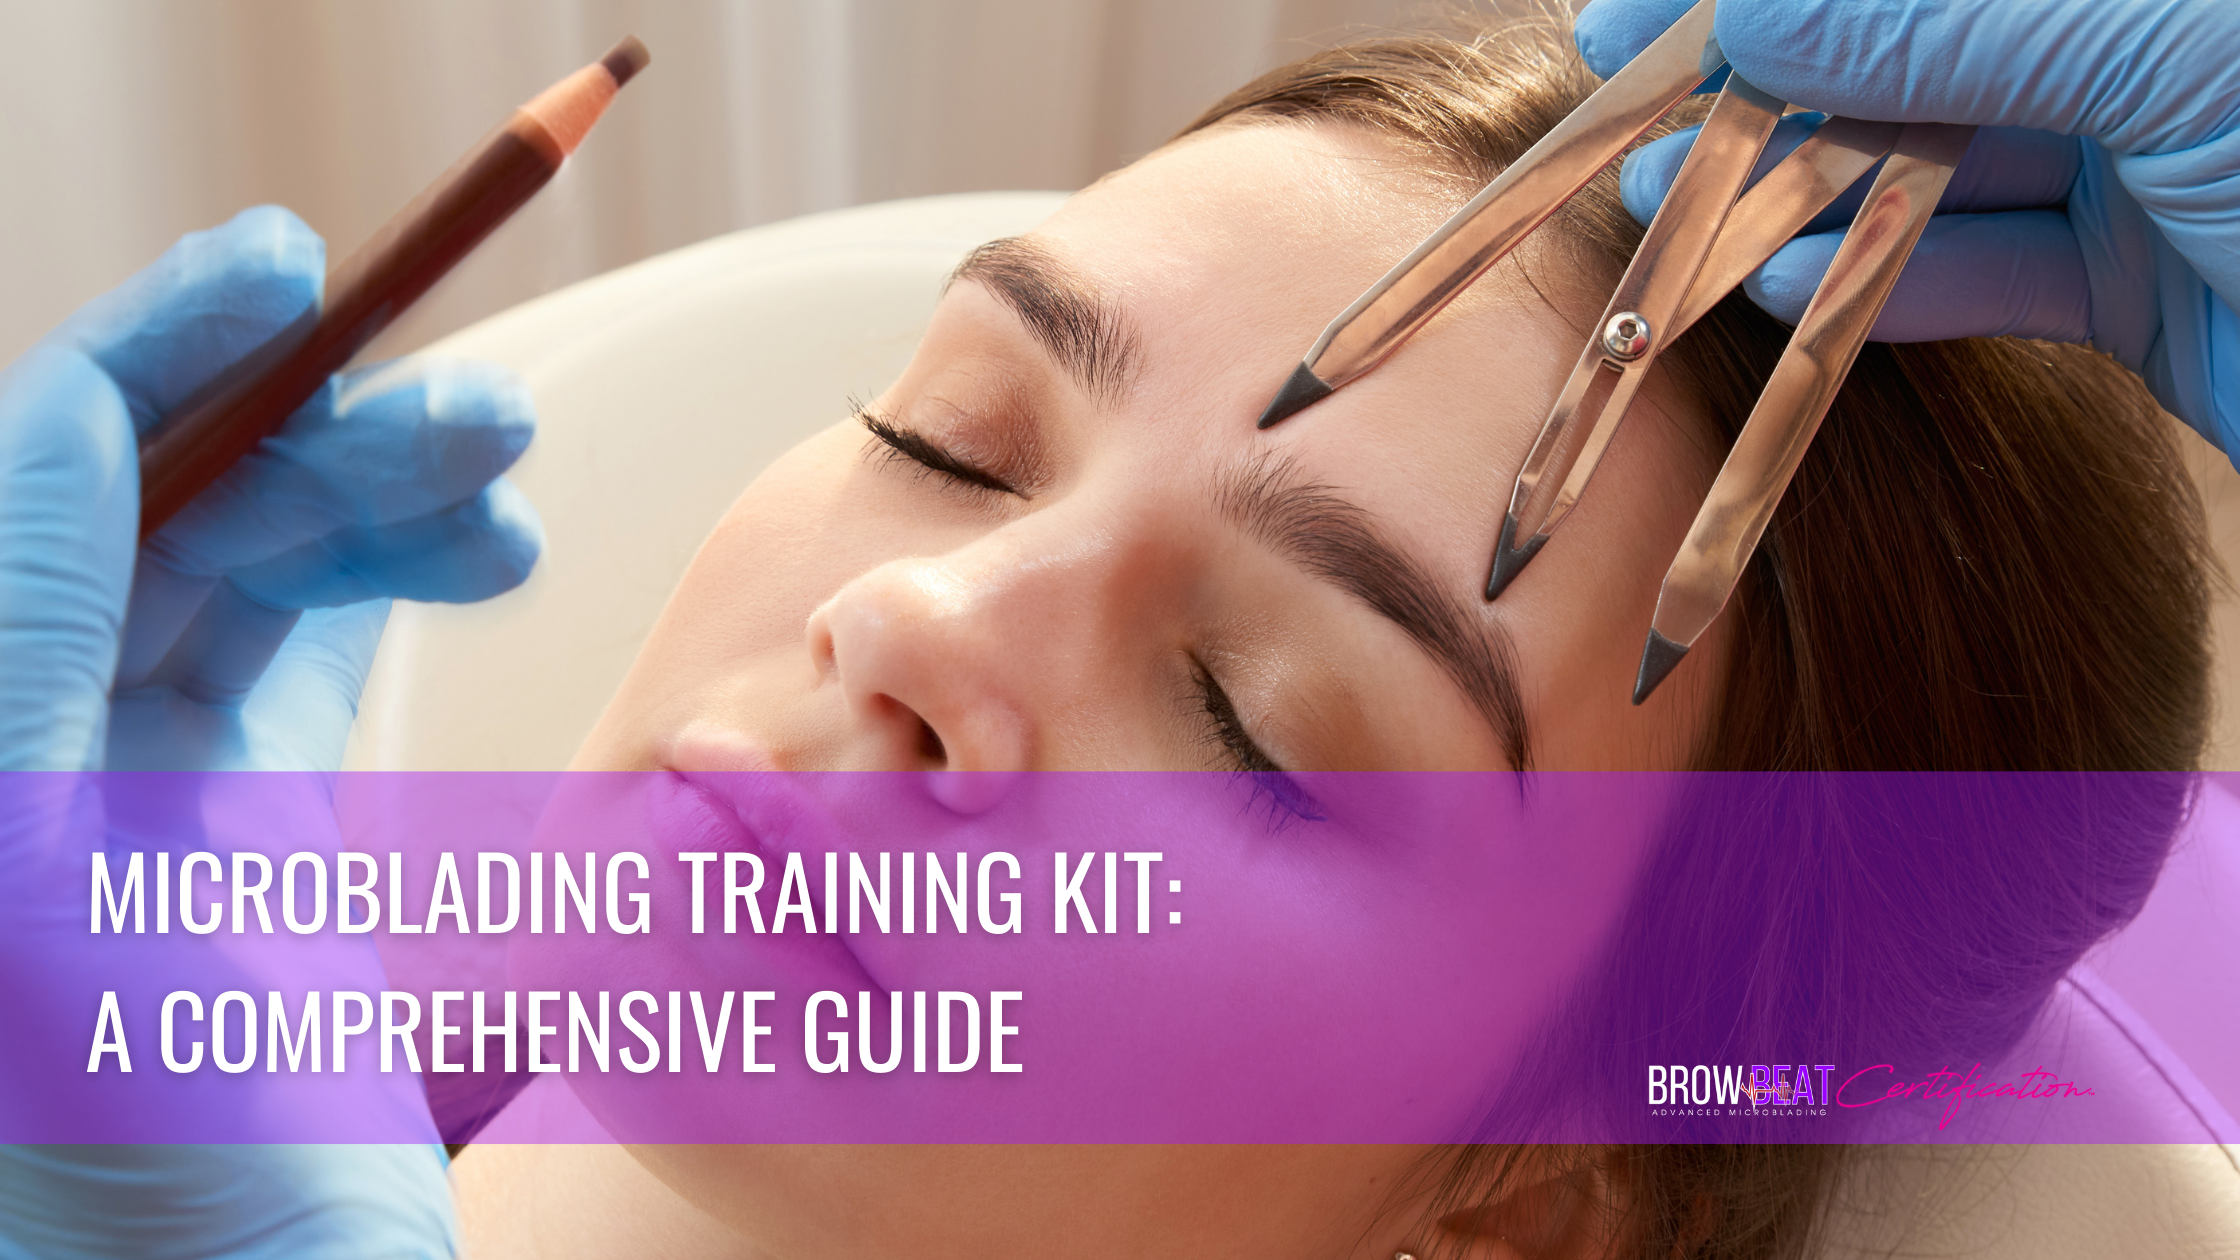 Microblading Training Kit: A Comprehensive Guide 2021